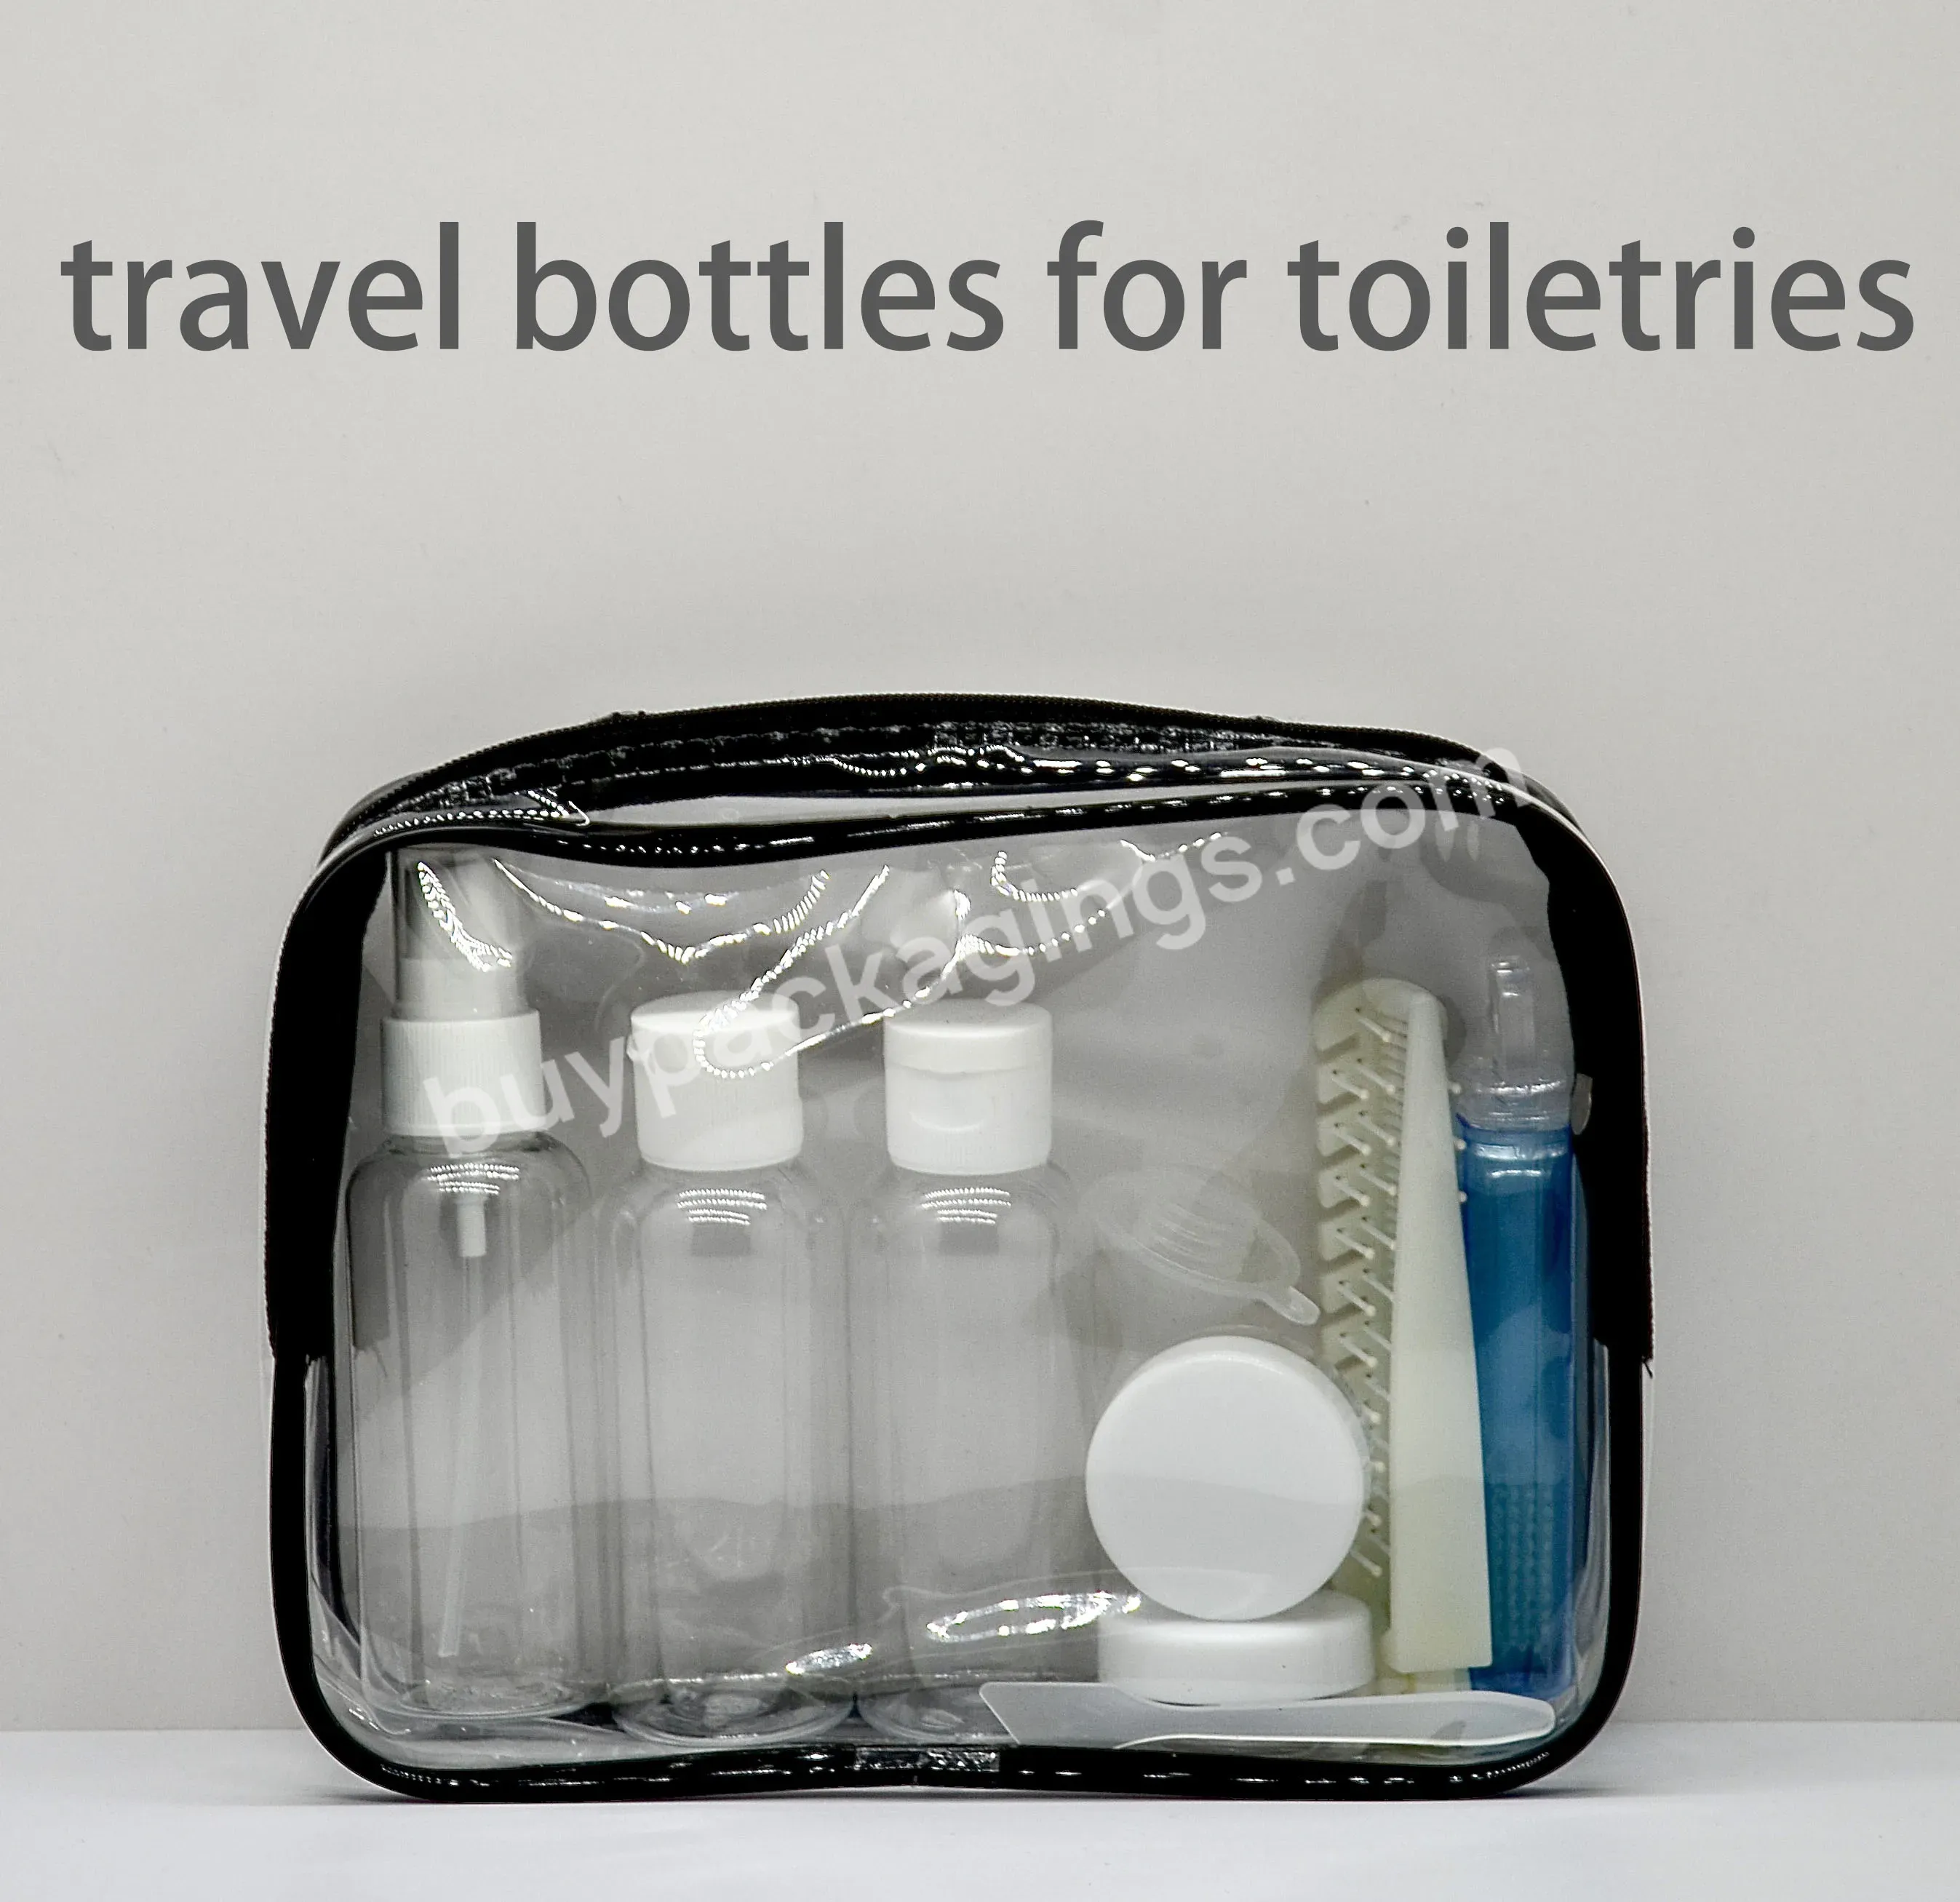 Travel Bottle Set Bottles Toiletries Liquid Containers For Cosmetic Travel Bottle For Toiletries With Toothebrush And Comb - Buy Travel Plastic Perfume Bottle,Travel Set Plastic Spray Bottle,Travel Bottle For Toiletries With Toothebrush And Comb.